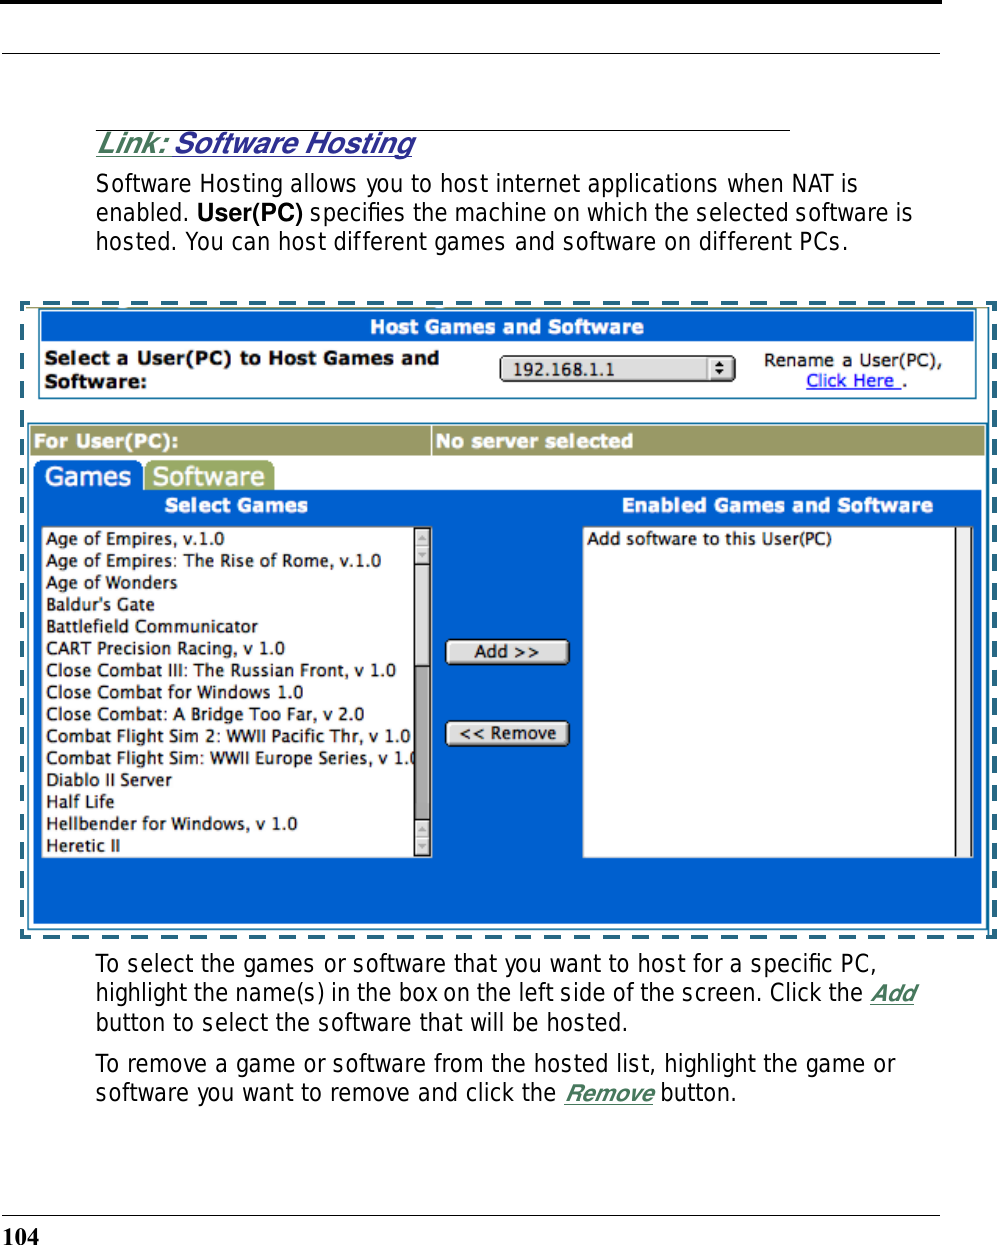 104Link: Software HostingSoftware Hosting allows you to host internet applications when NAT is enabled. User(PC) speciﬁes the machine on which the selected software is hosted. You can host different games and software on different PCs.To select the games or software that you want to host for a speciﬁc PC, highlight the name(s) in the box on the left side of the screen. Click the Add button to select the software that will be hosted.To remove a game or software from the hosted list, highlight the game or software you want to remove and click the Remove button.